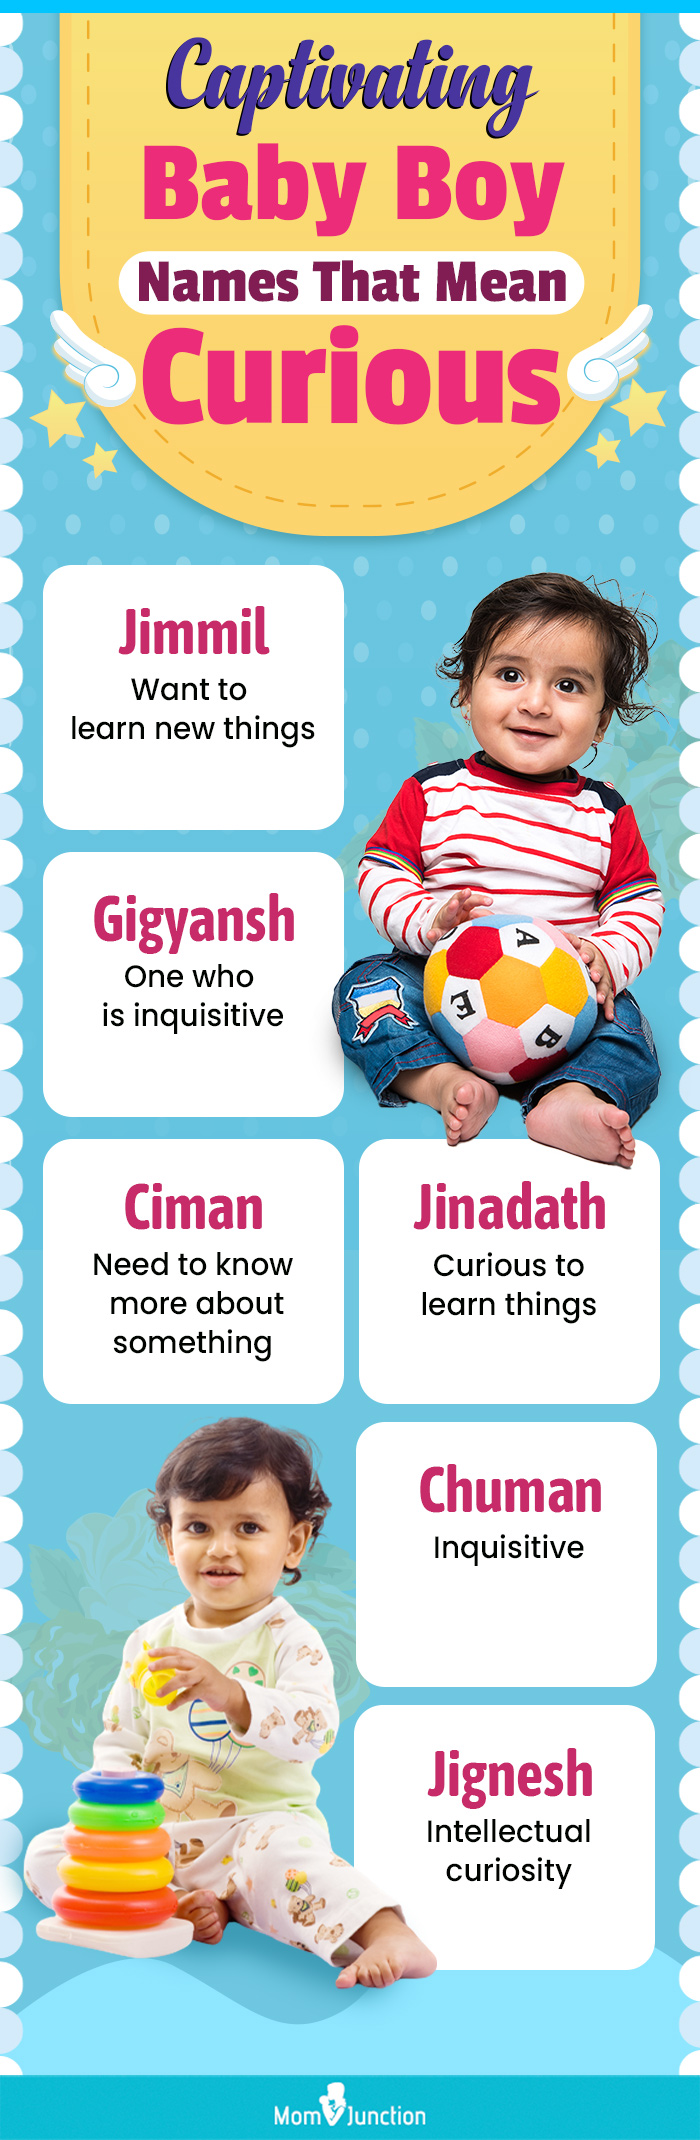 captivating baby boy names that mean curious (infographic)